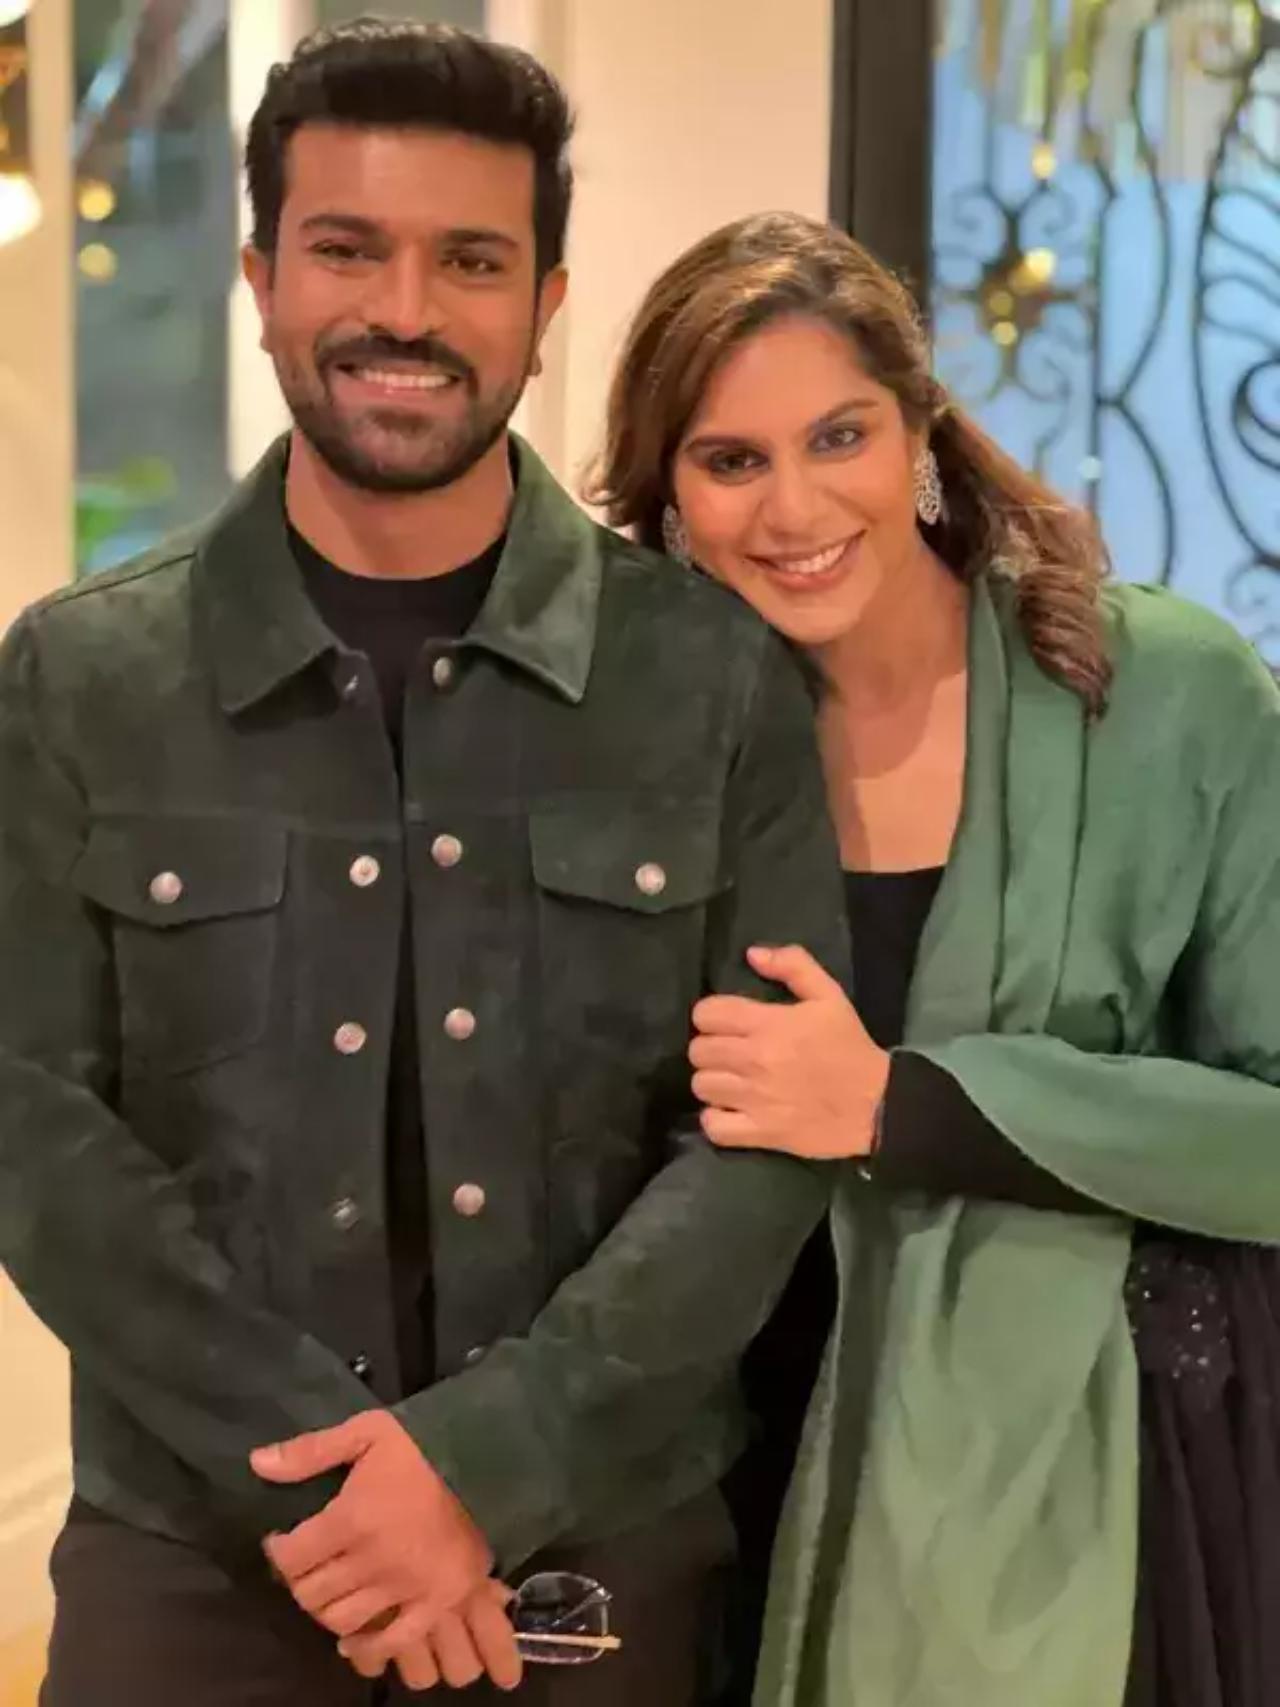 RRR superstar Ram Charan and Upasana were friends long before their romantic relationship. Rumour has it that they first met at the Padma Seshadri Bhavan in Chennai where they studied together up until the ninth grade